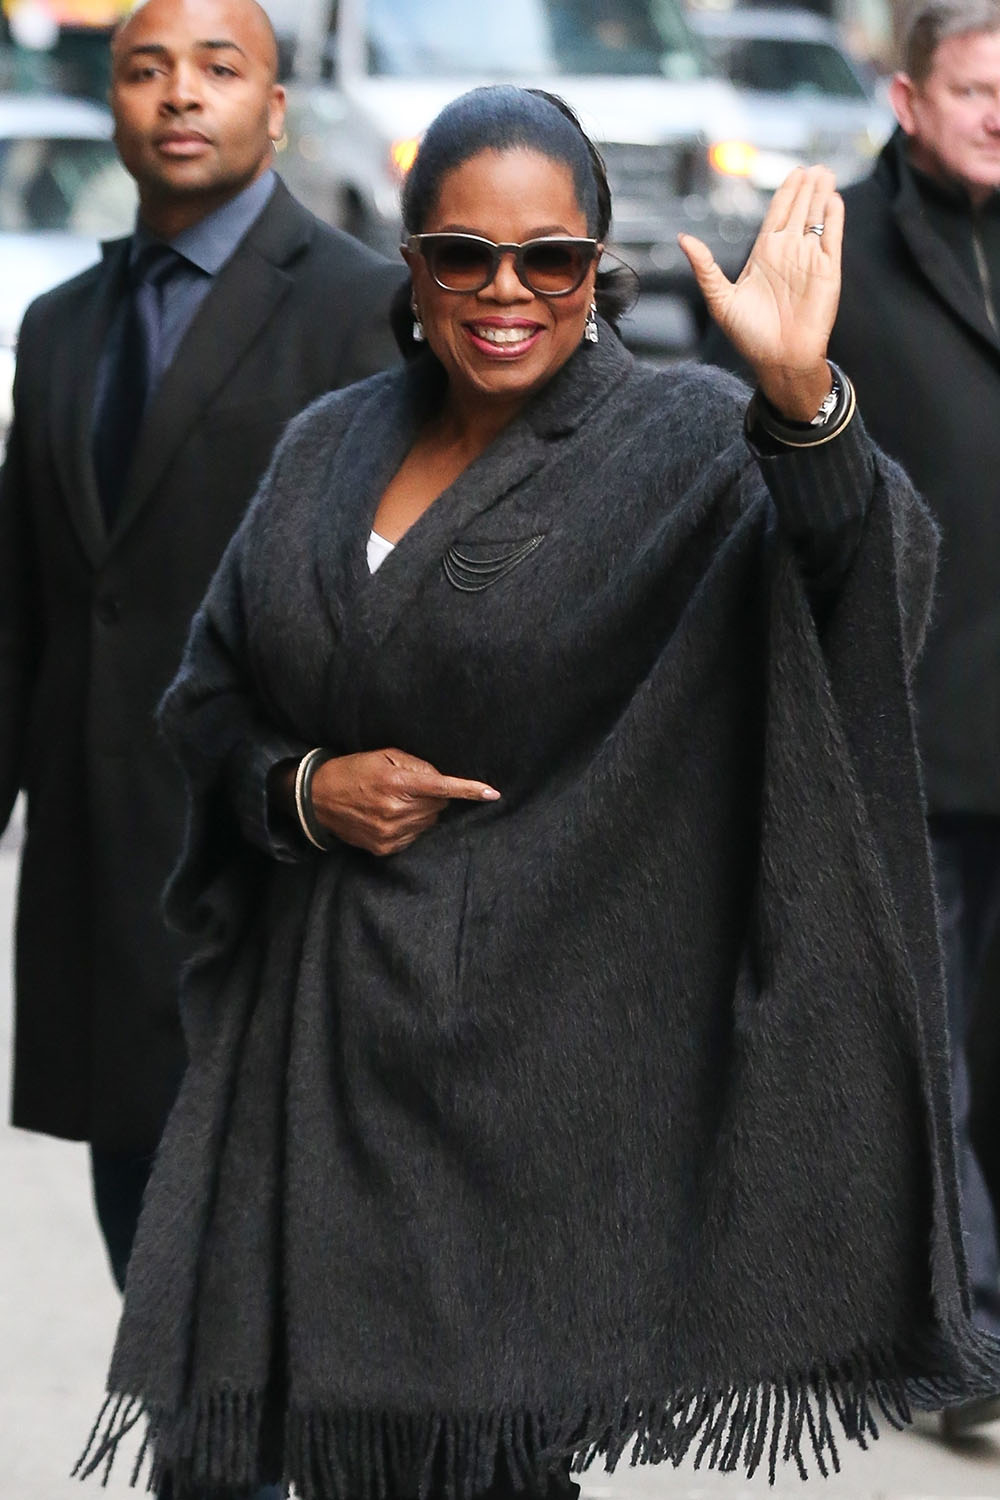 Oprah Winfrey seen arriving at The Late Show in NYC